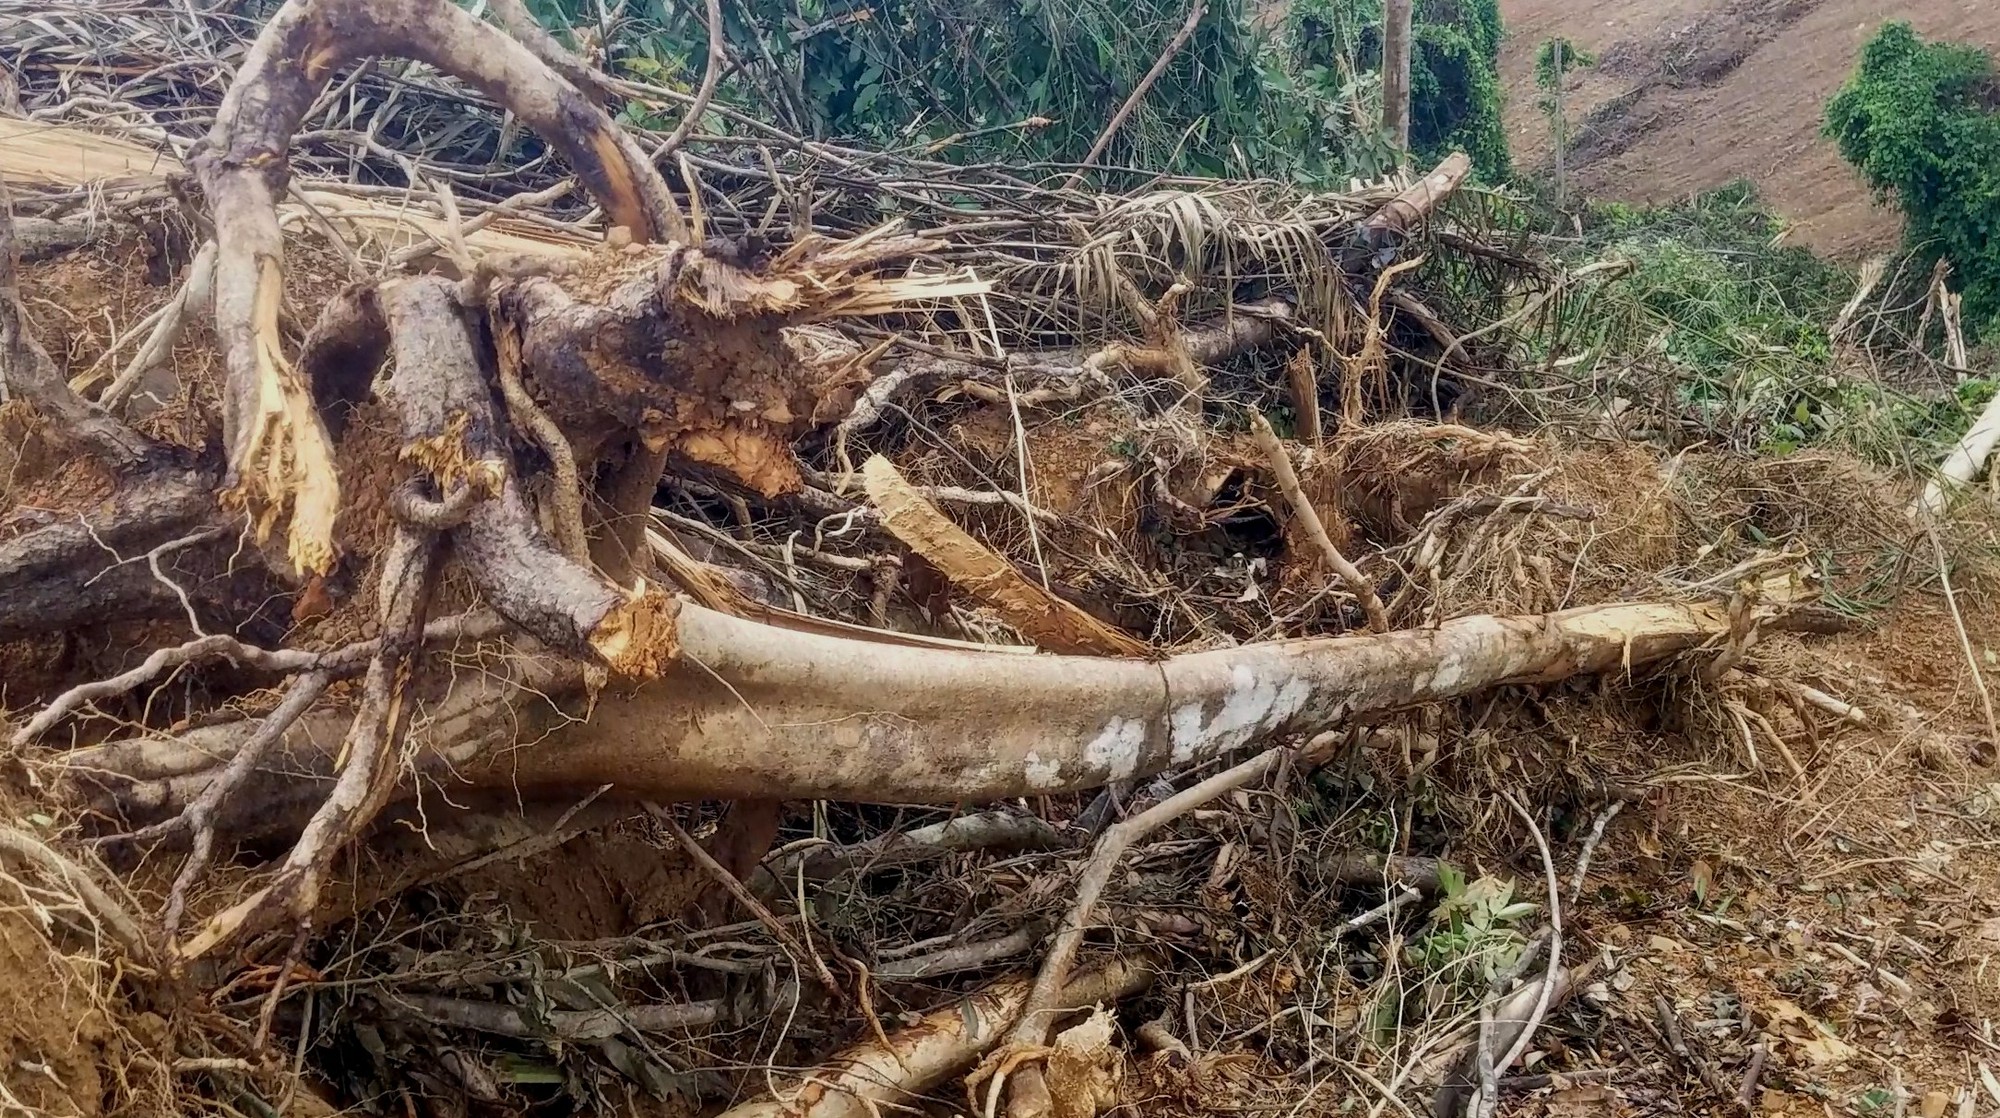 Fallen trees at the forest. Photo: Tuoi Tre